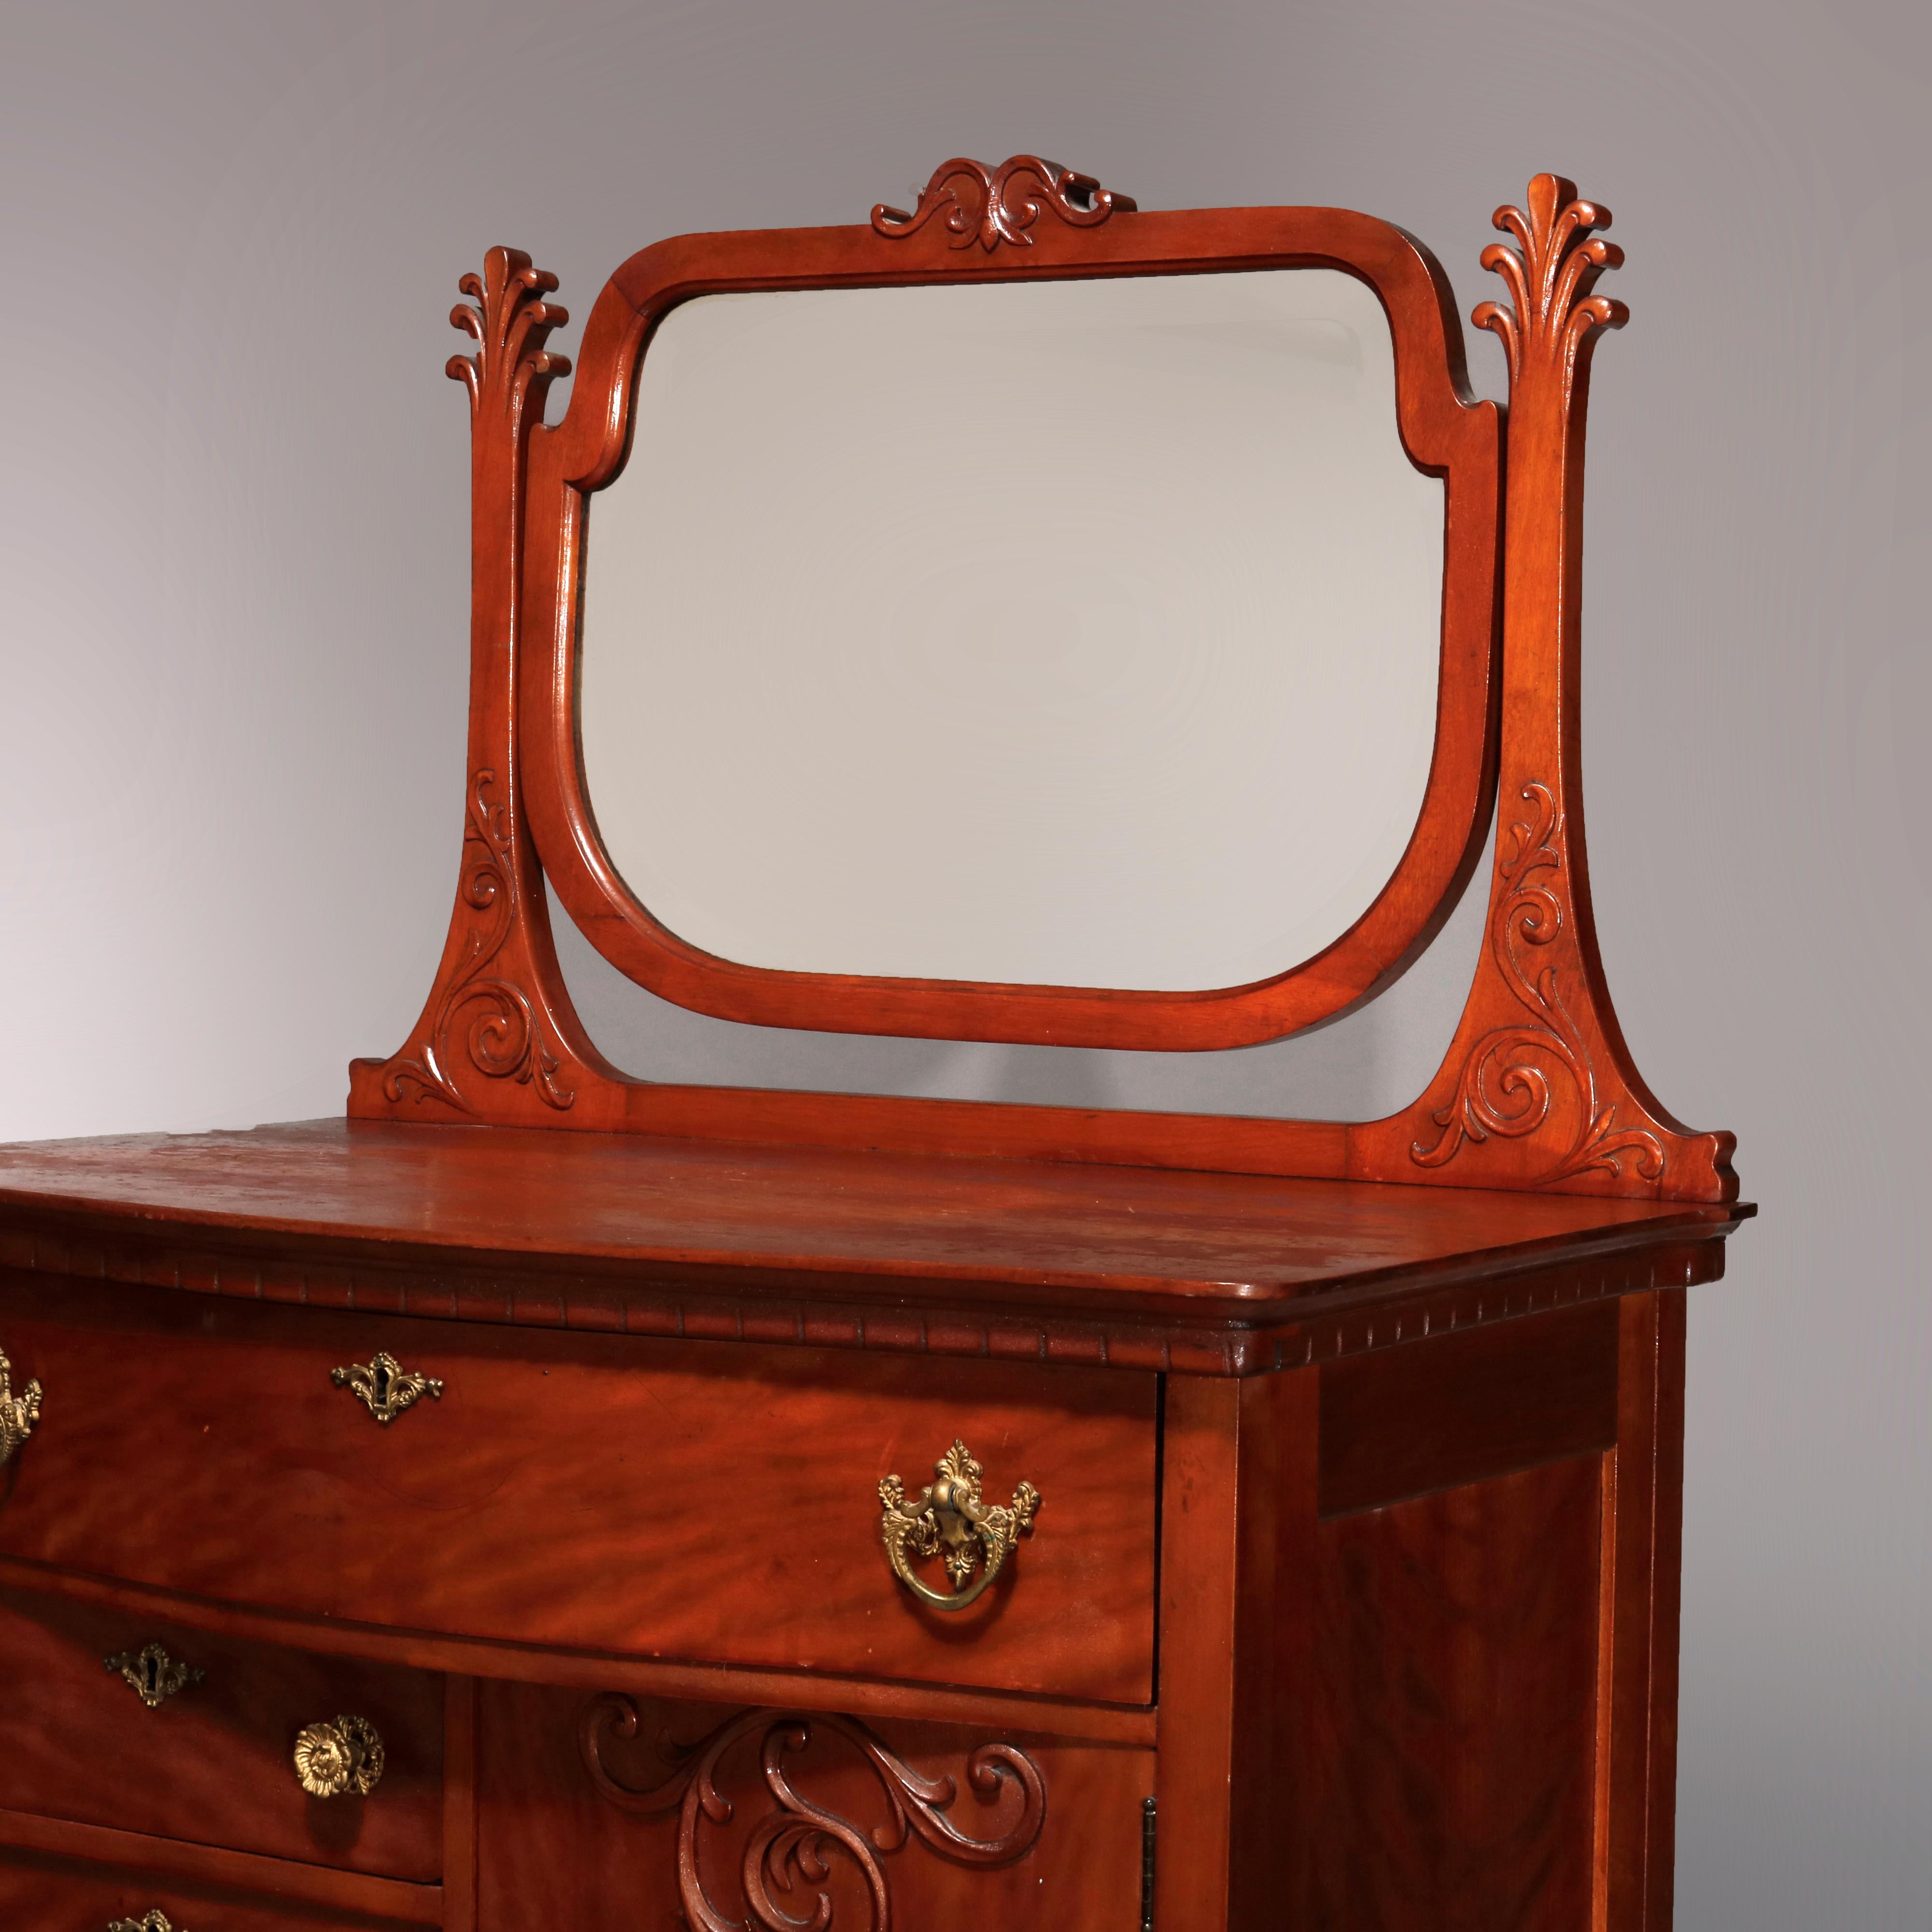 Carved Antique Victorian Birch Mirrored Chiffonier Bonnet Chest of Drawers, circa 1900